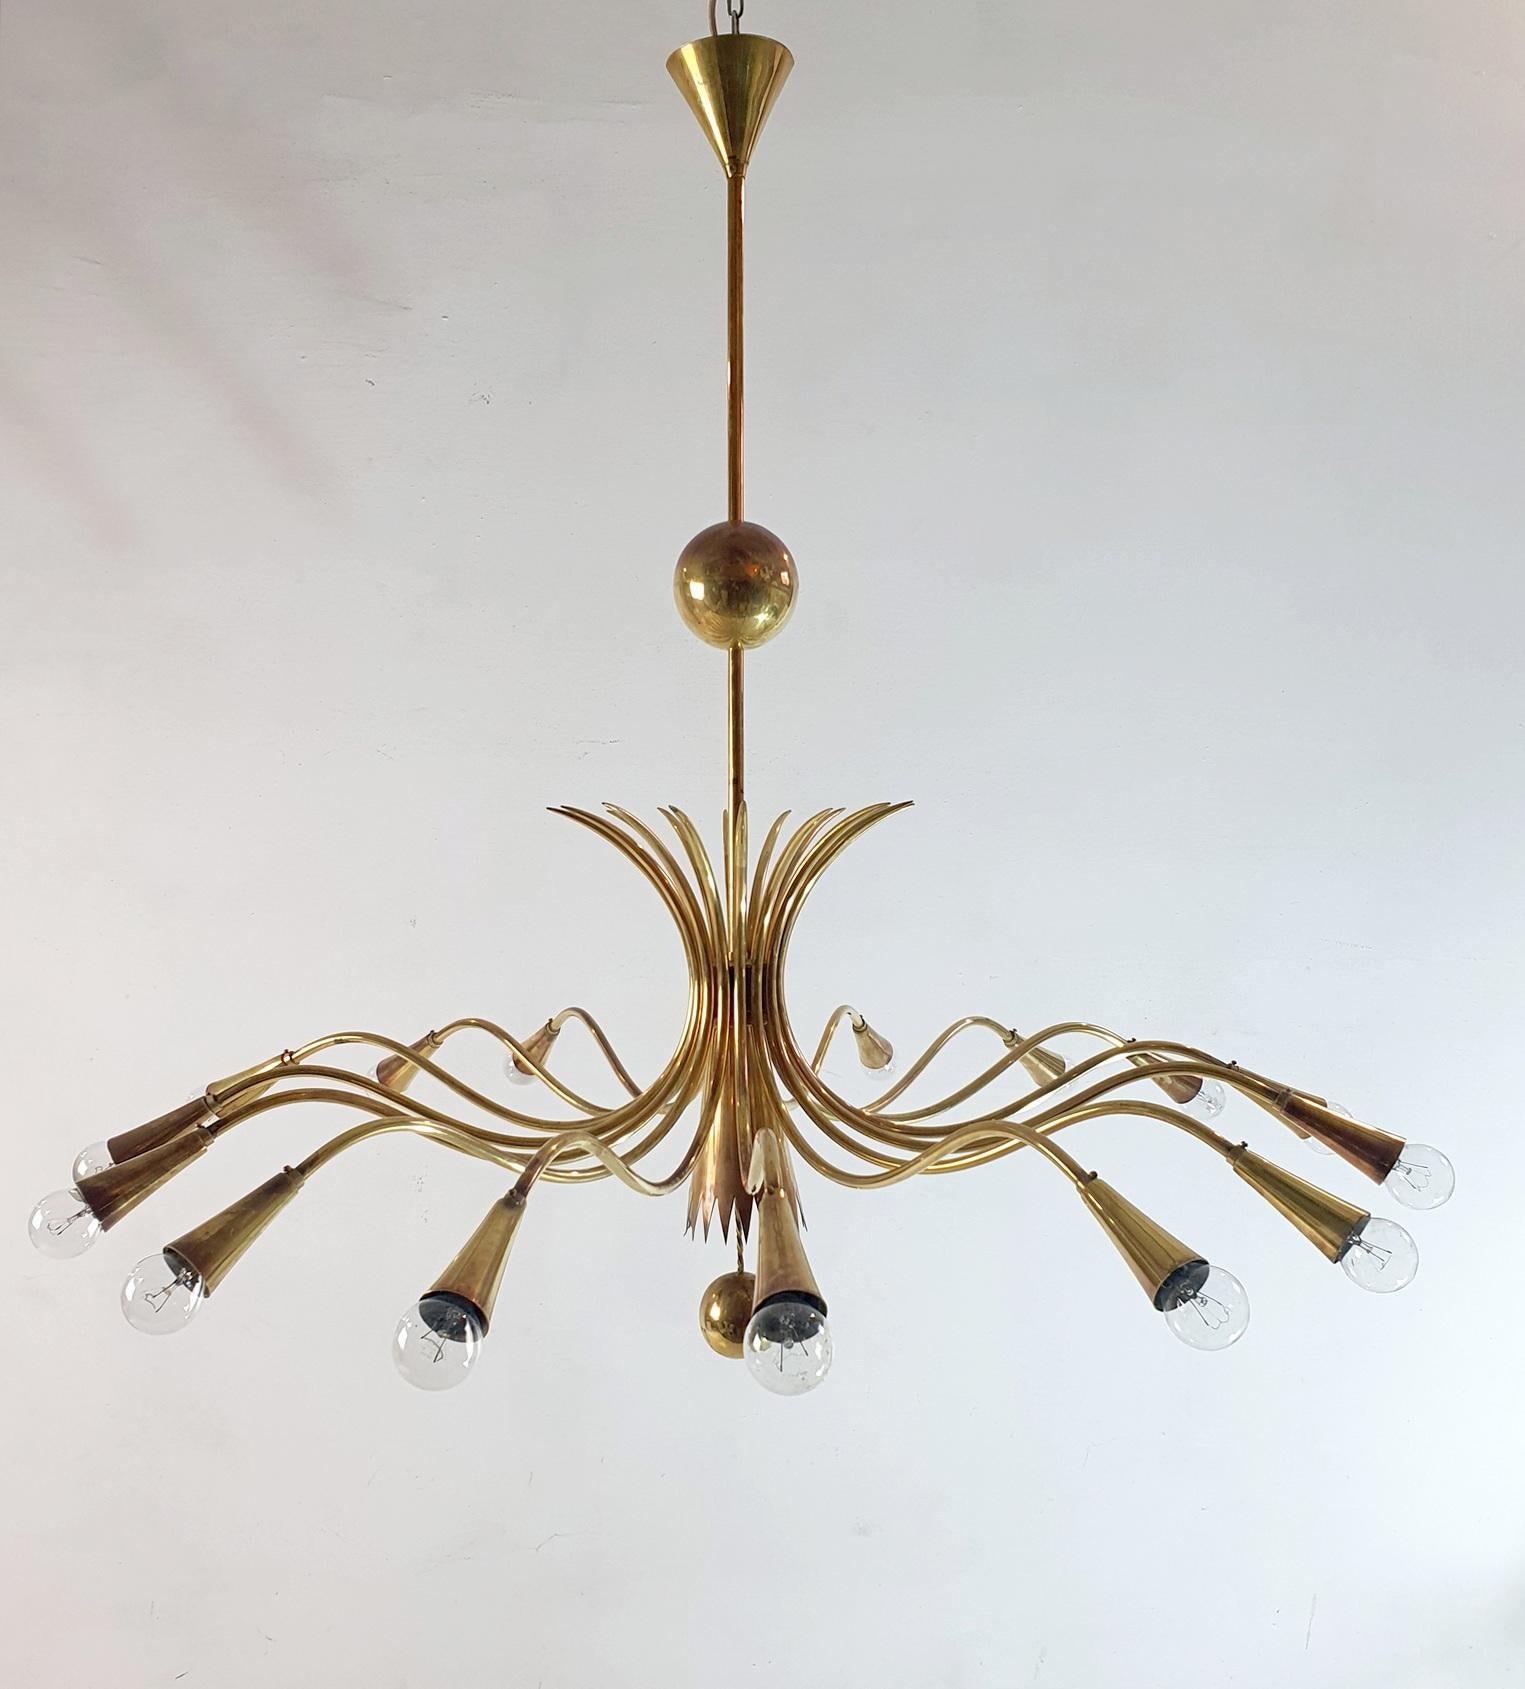 Rare and large mid-century chandelier in brass with sixteen arms in the manner of Guglielmo Ulrich, Italy. Fully functioning and in original condition. Electricity is fully functioning. This elegant chandelier is handmade during the 1950's and